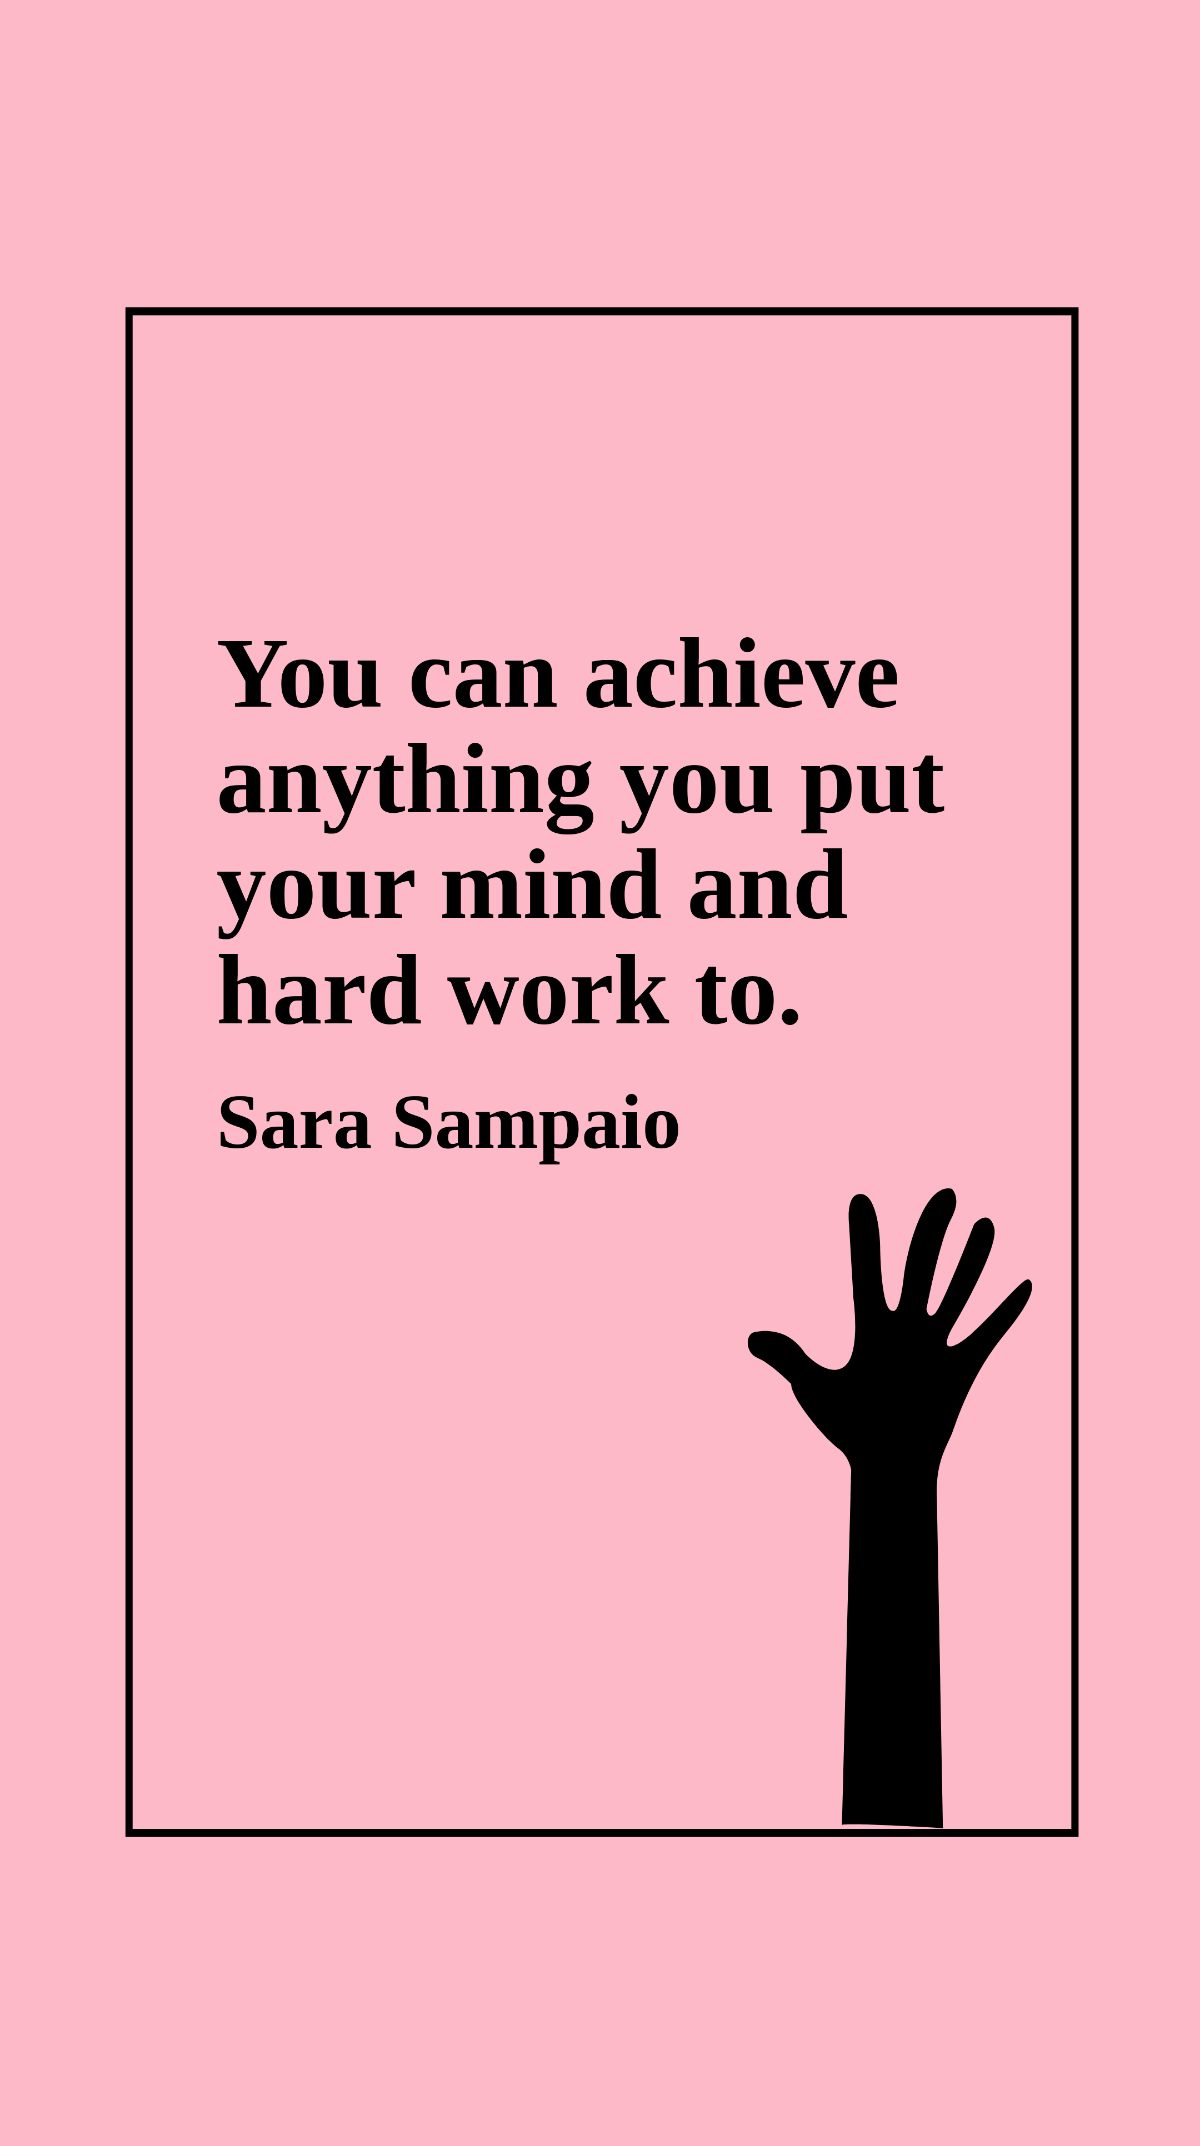 Sara Sampaio - You can achieve anything you put your mind and hard work to.